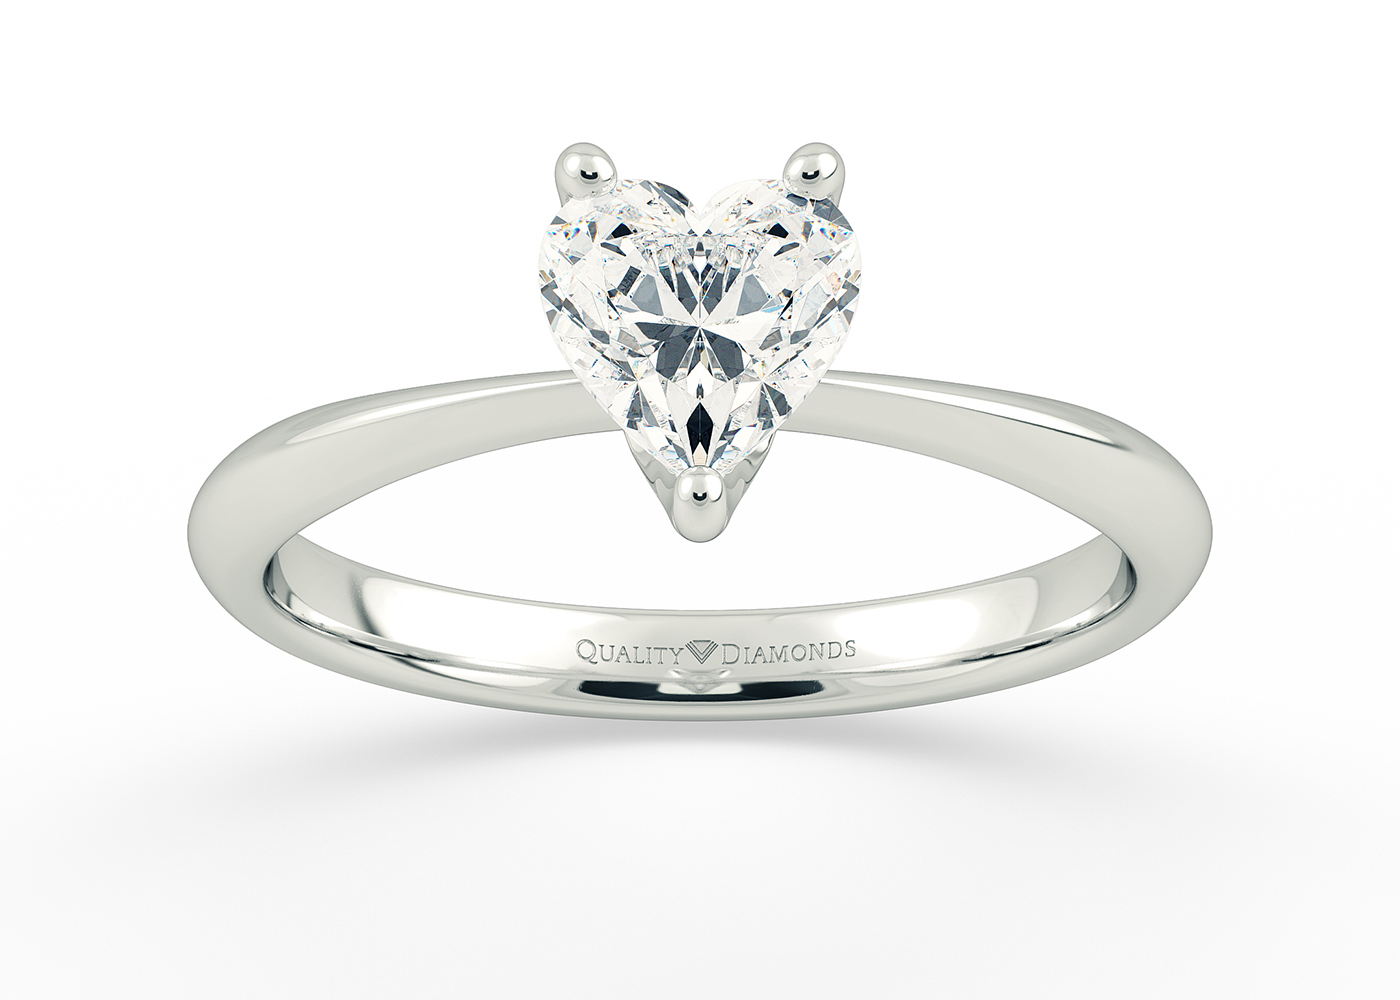 Two Carat Heart Solitaire Diamond Engagement Ring in 18K White Gold